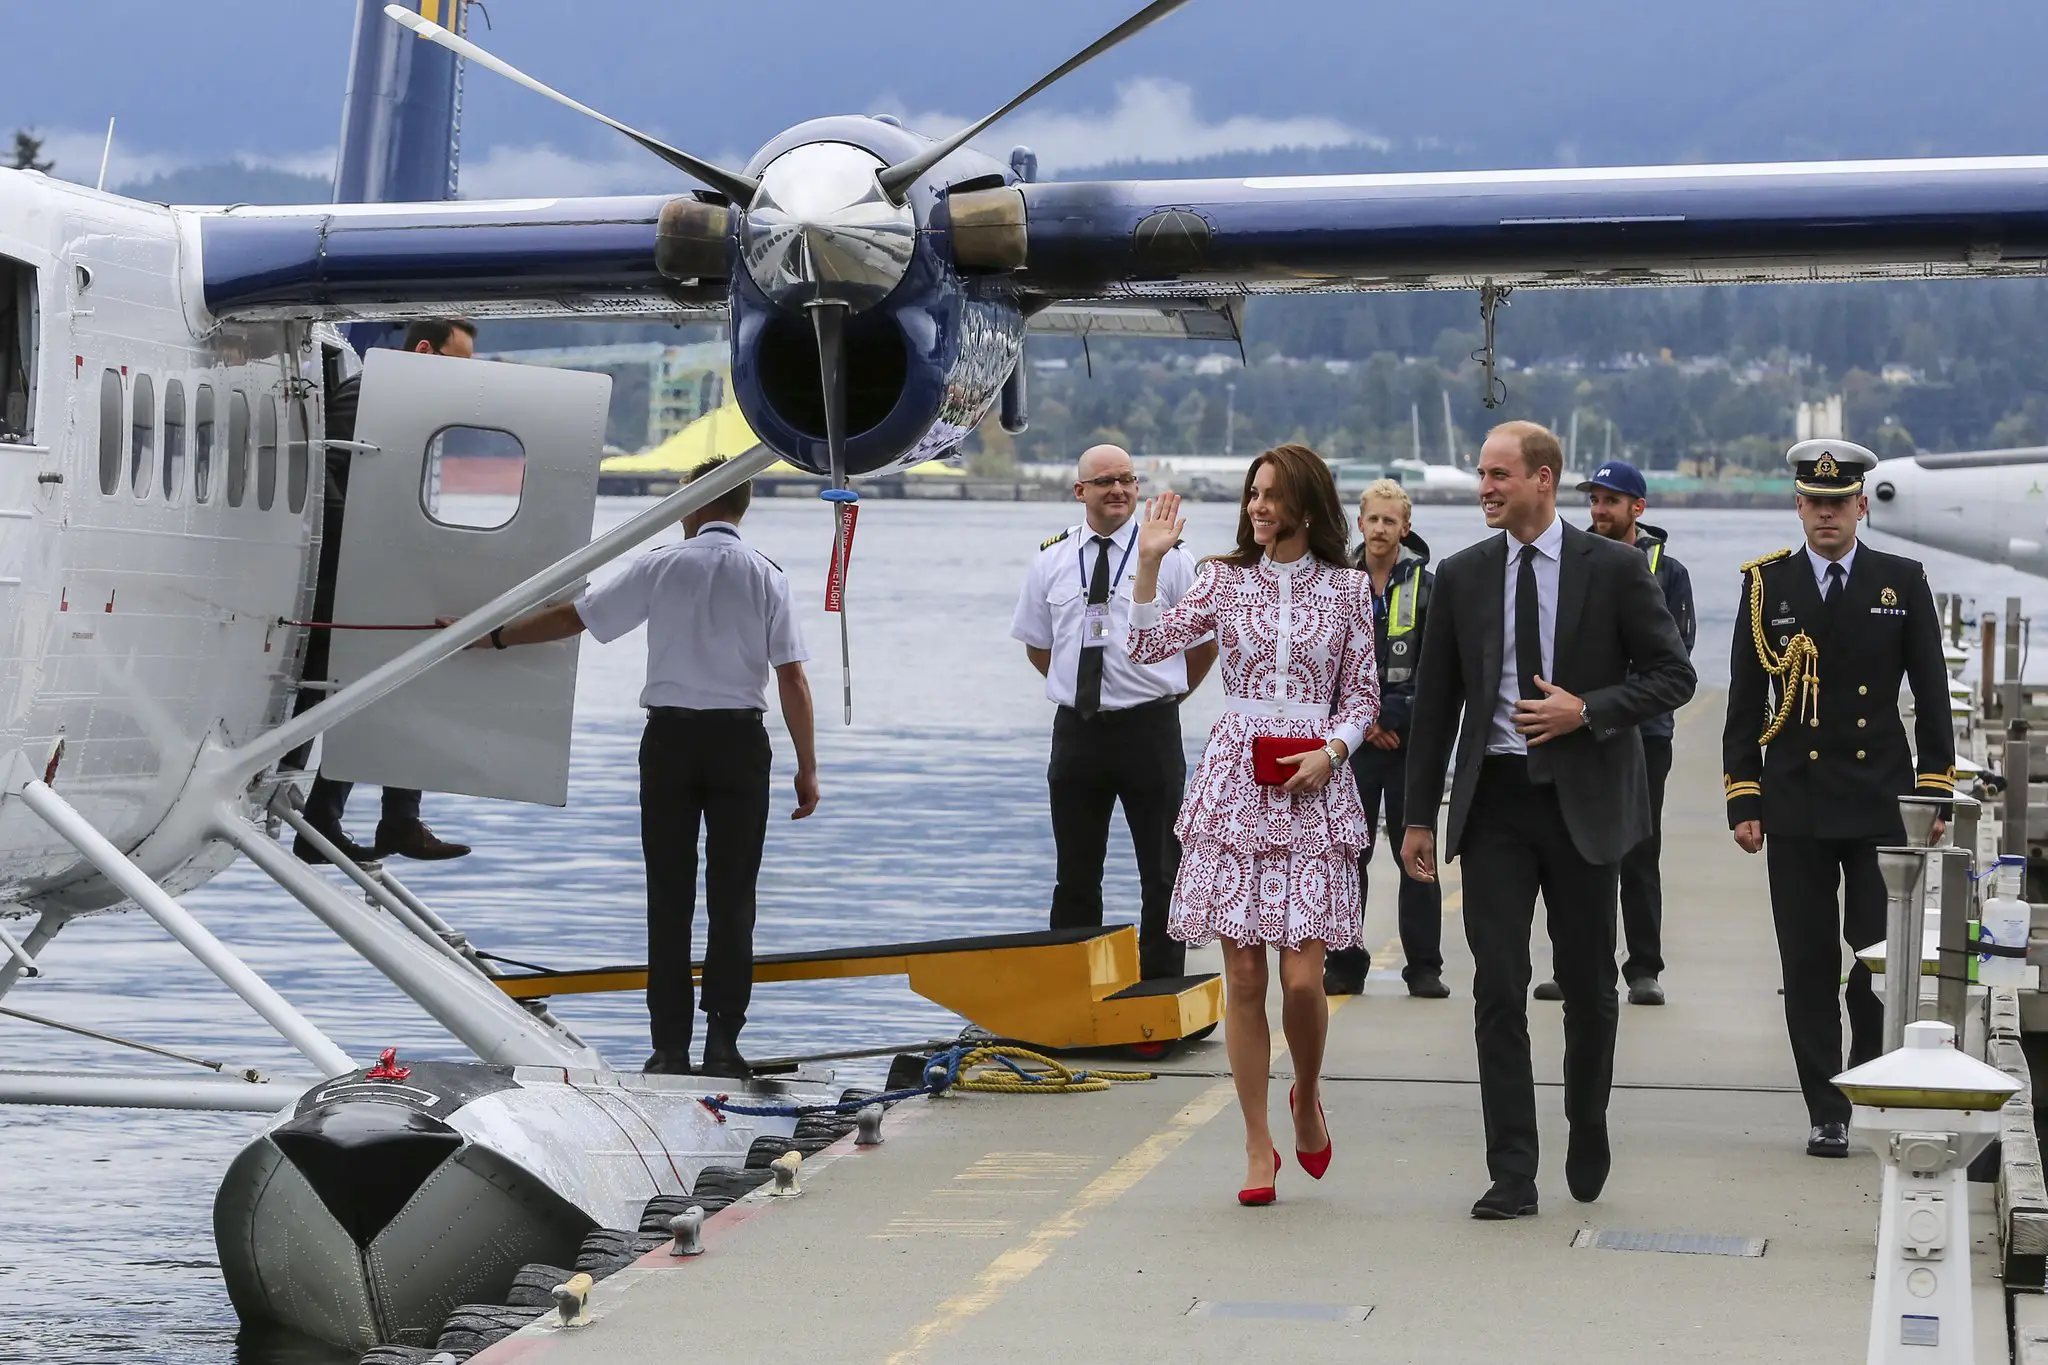 The Duke and Duchess of Cambridge travelled in float plane to vancouver in 2016